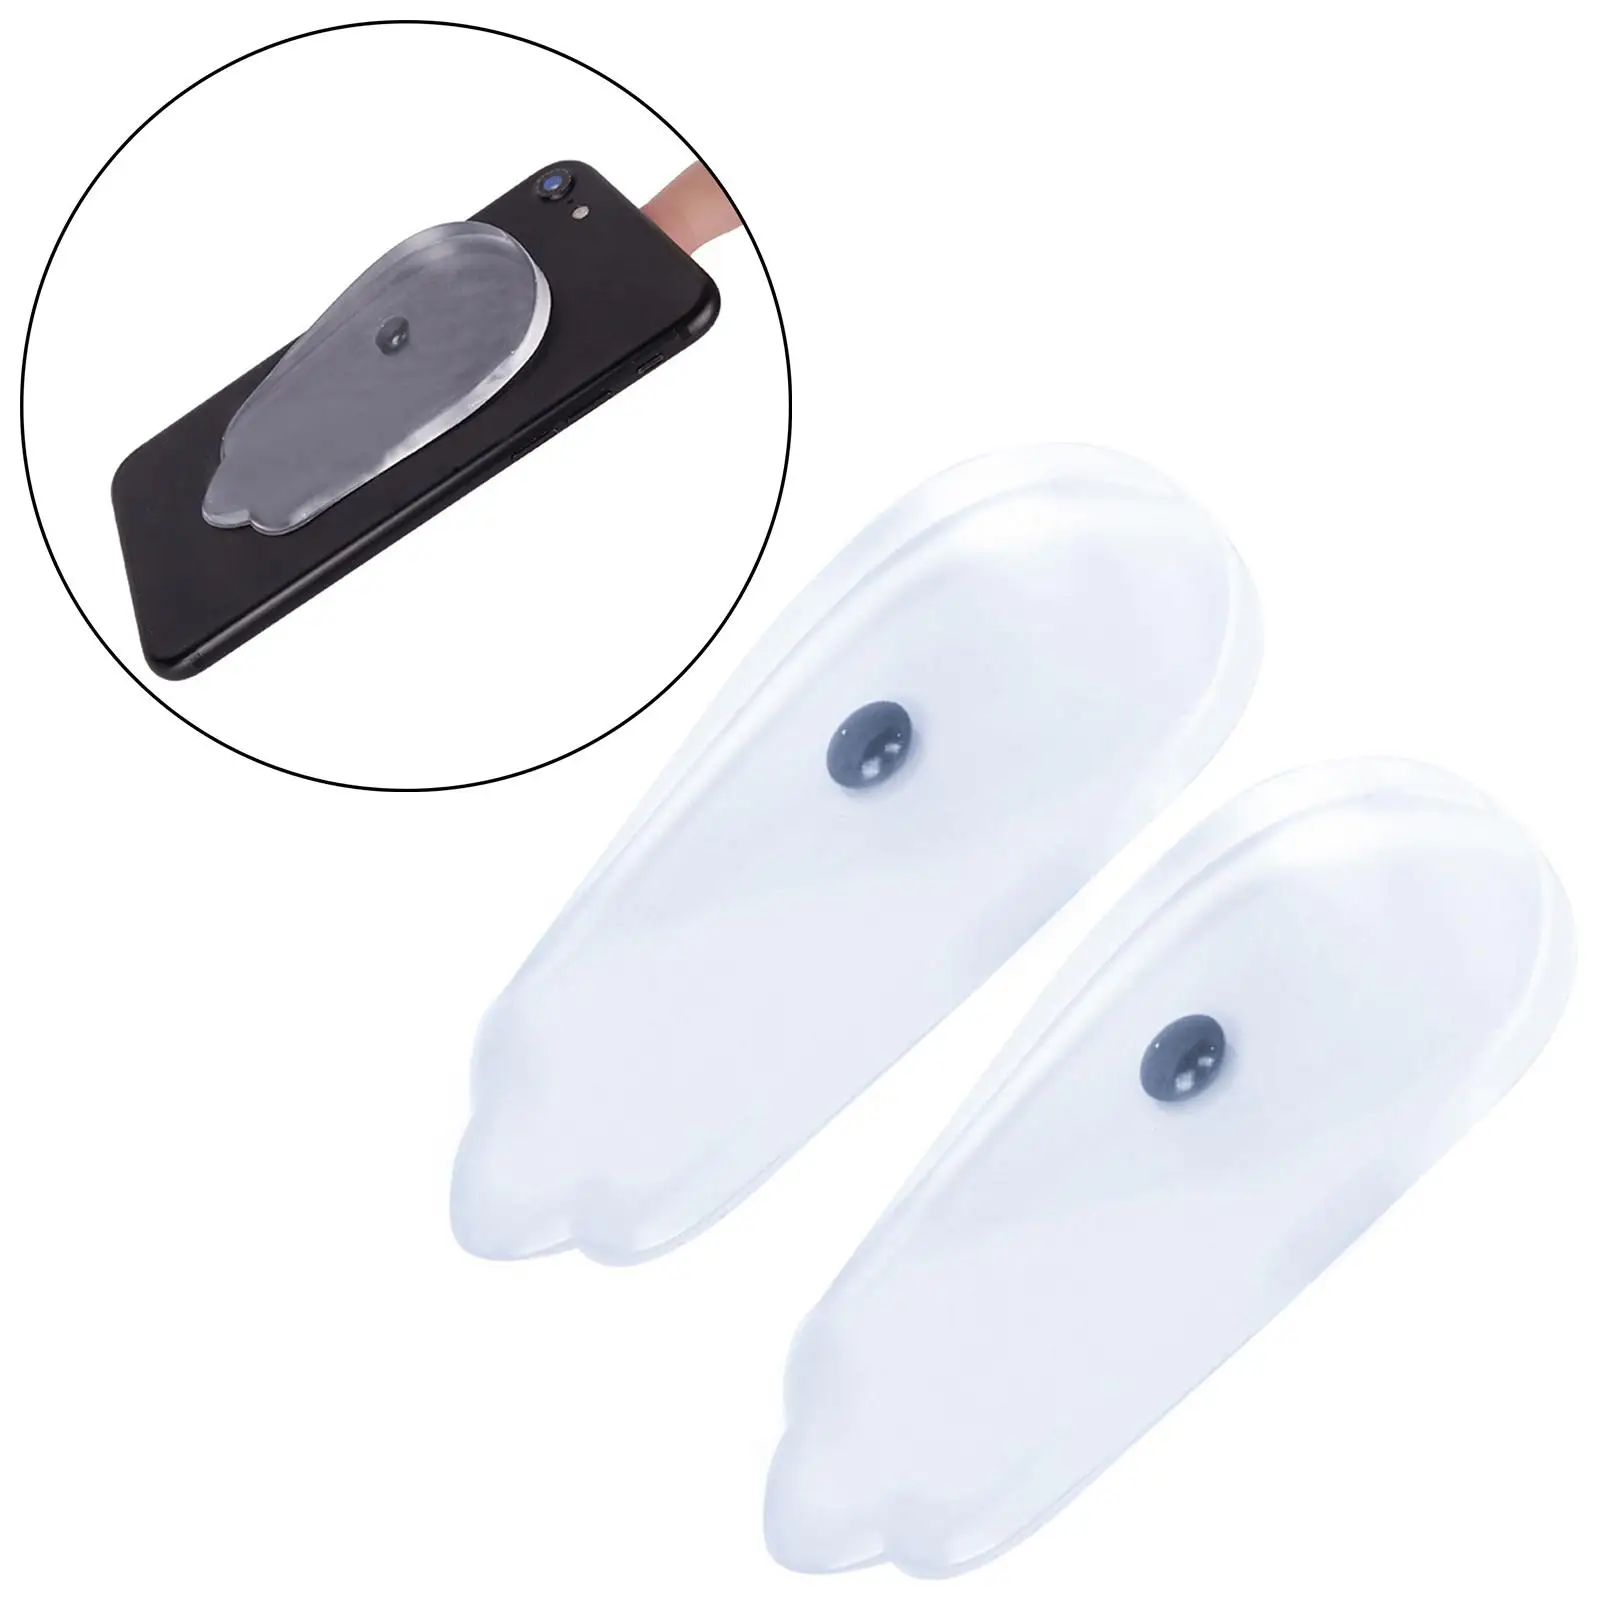 2x  Silicone Orthotic Heel Cups, Lightweight Insert s Correction  for Correction Foot Care S Kids